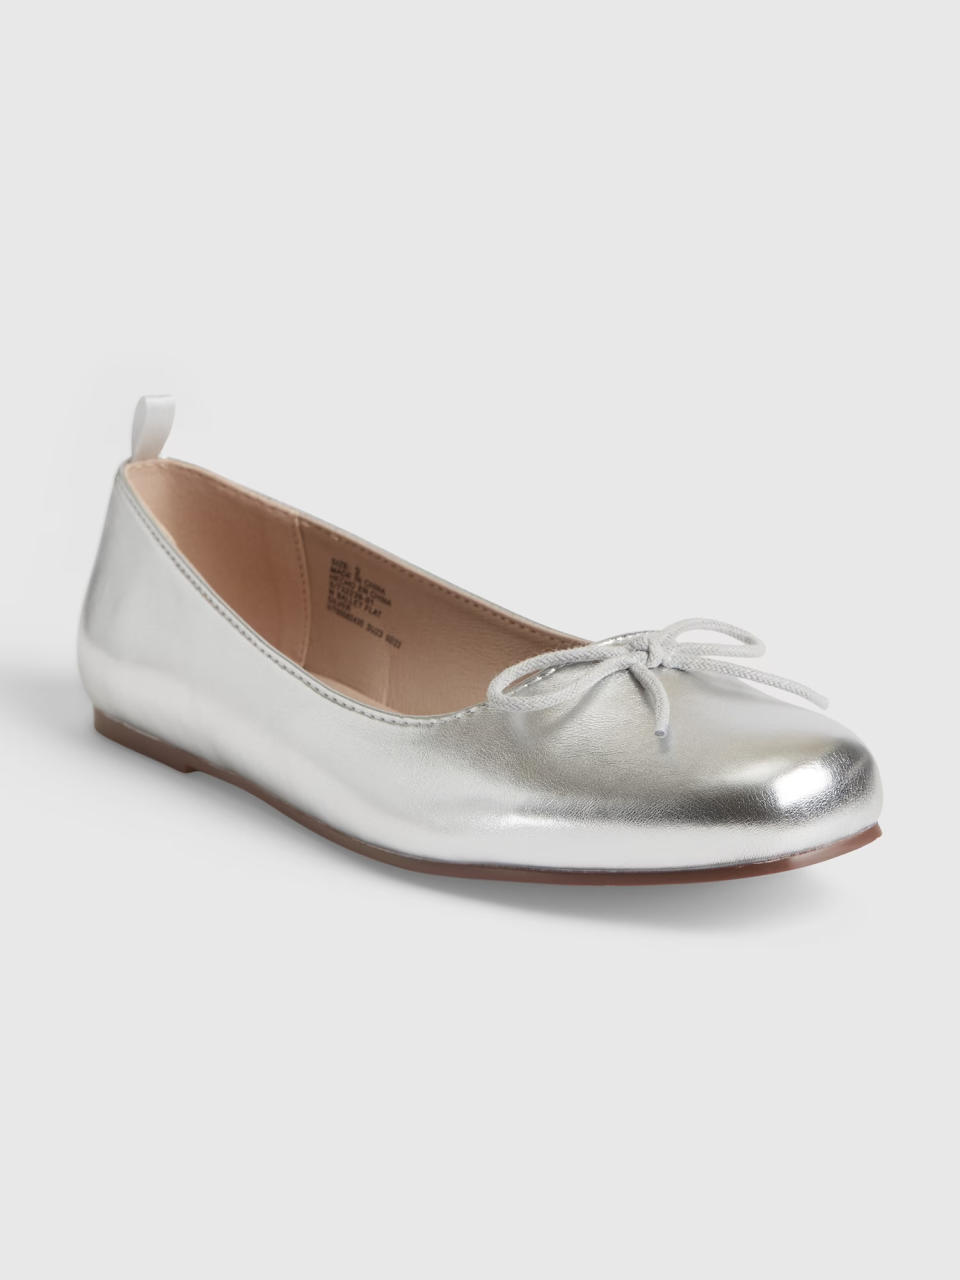 Gap Silver Leather Ballet Flats